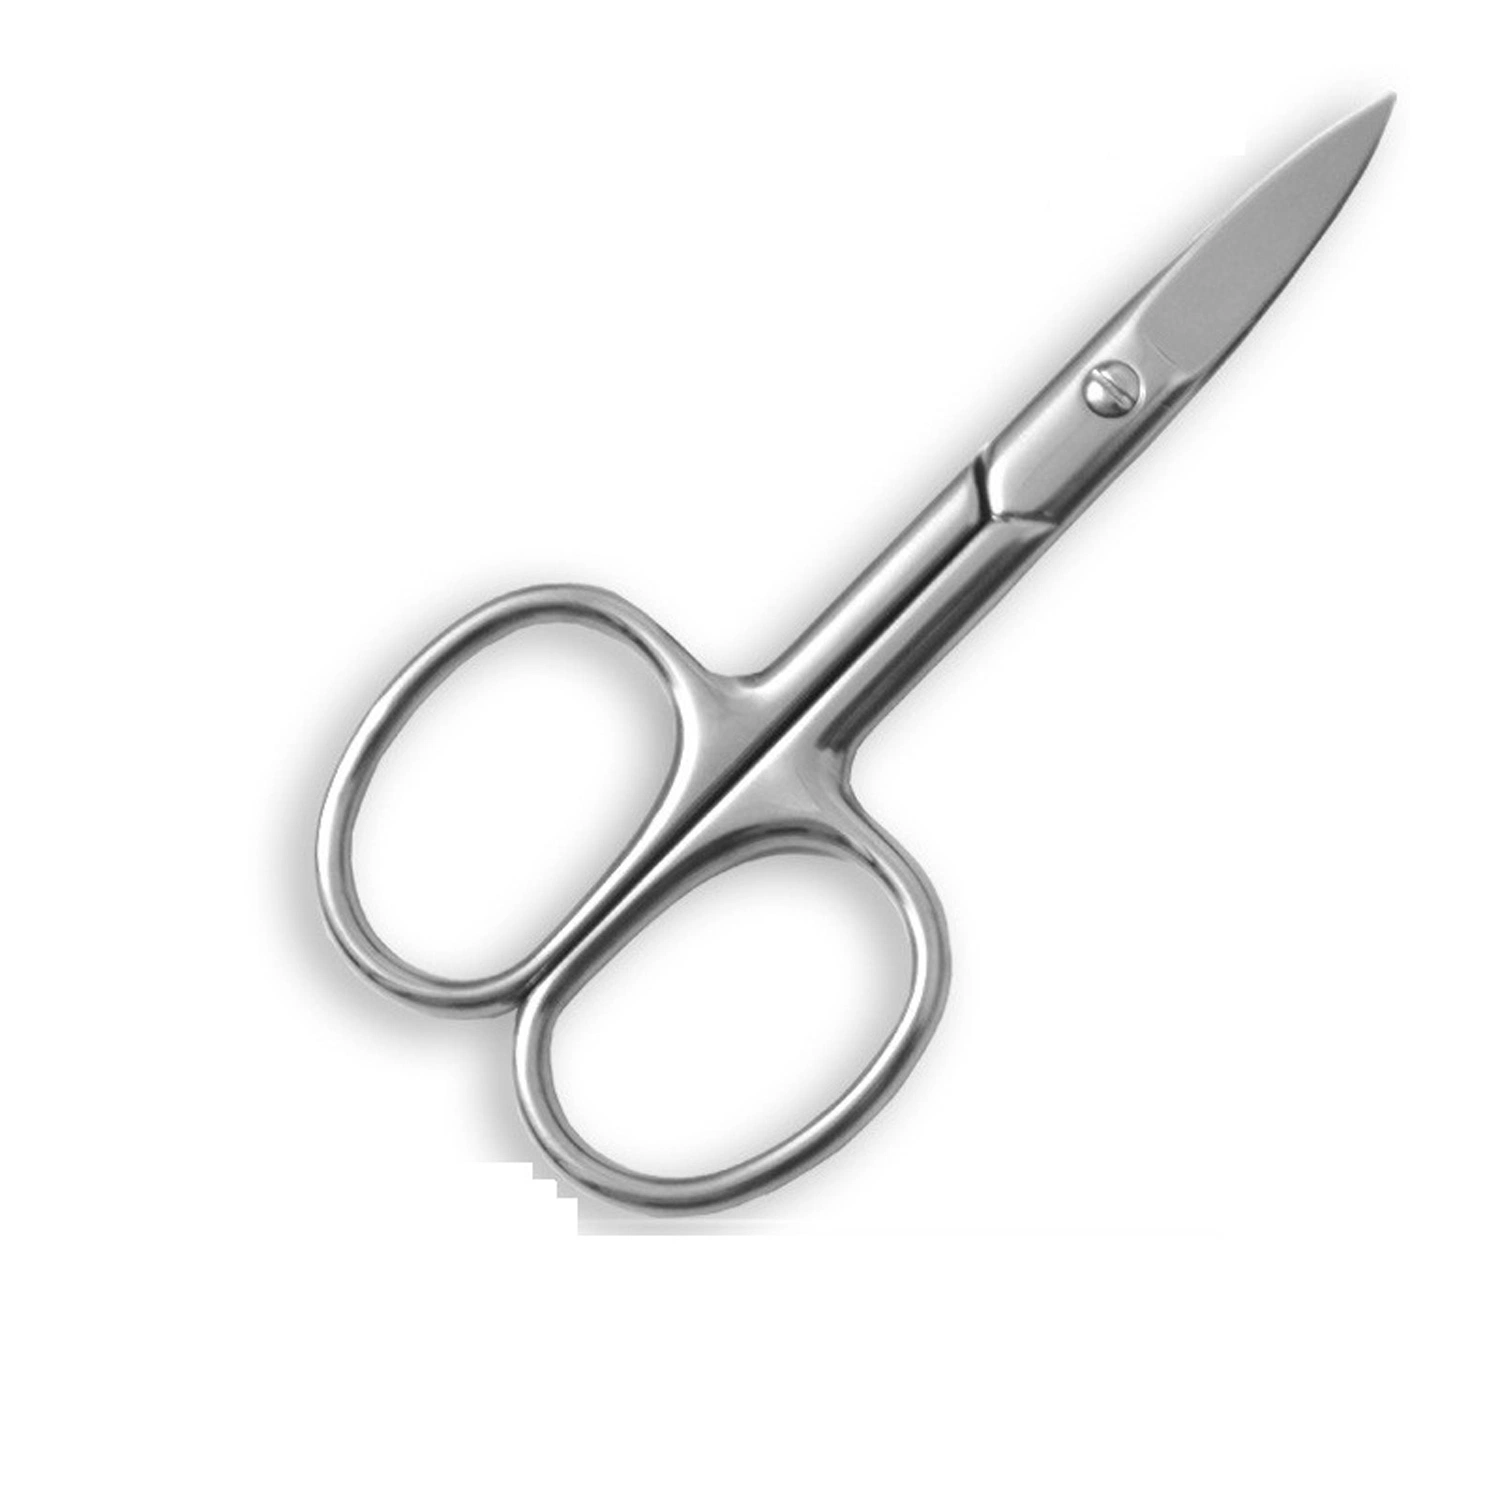 Stainless Steel Curved and Rounded Facial Hair Eyebrow Scissors for Eyebrows Eyelashes and Ear Hair